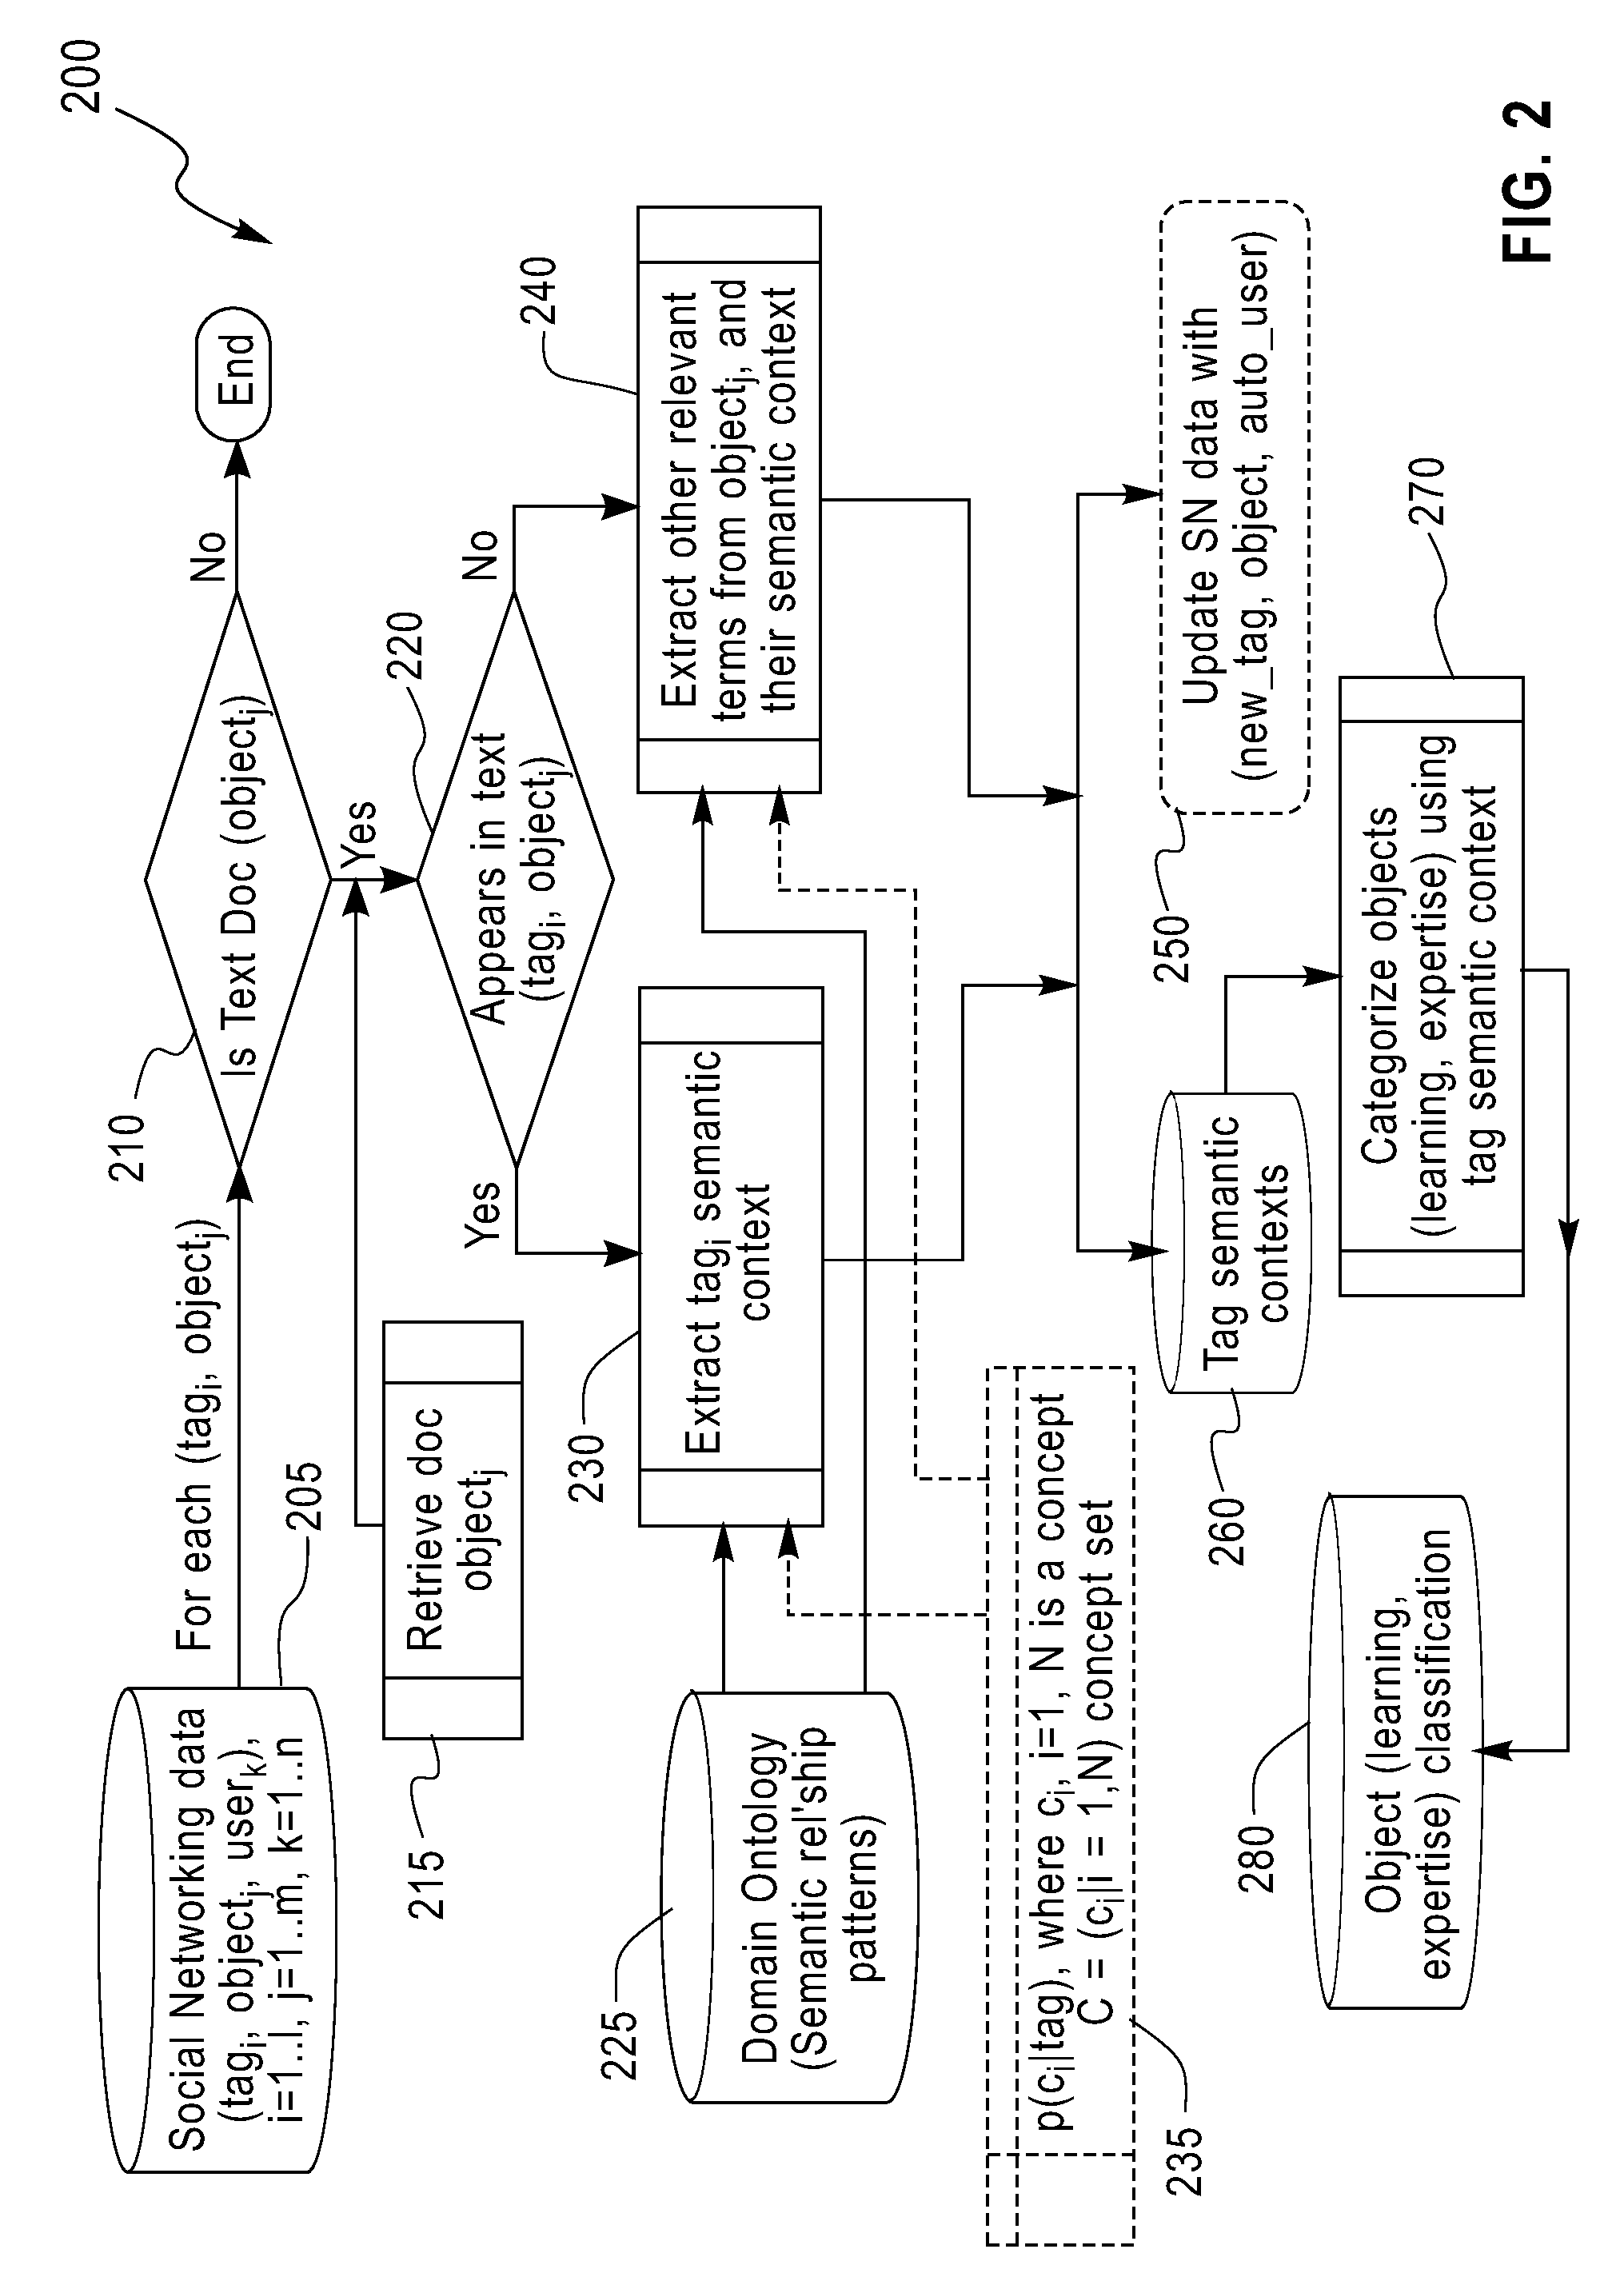 System and method for facilitating skill gap analysis and remediation based on tag analytics